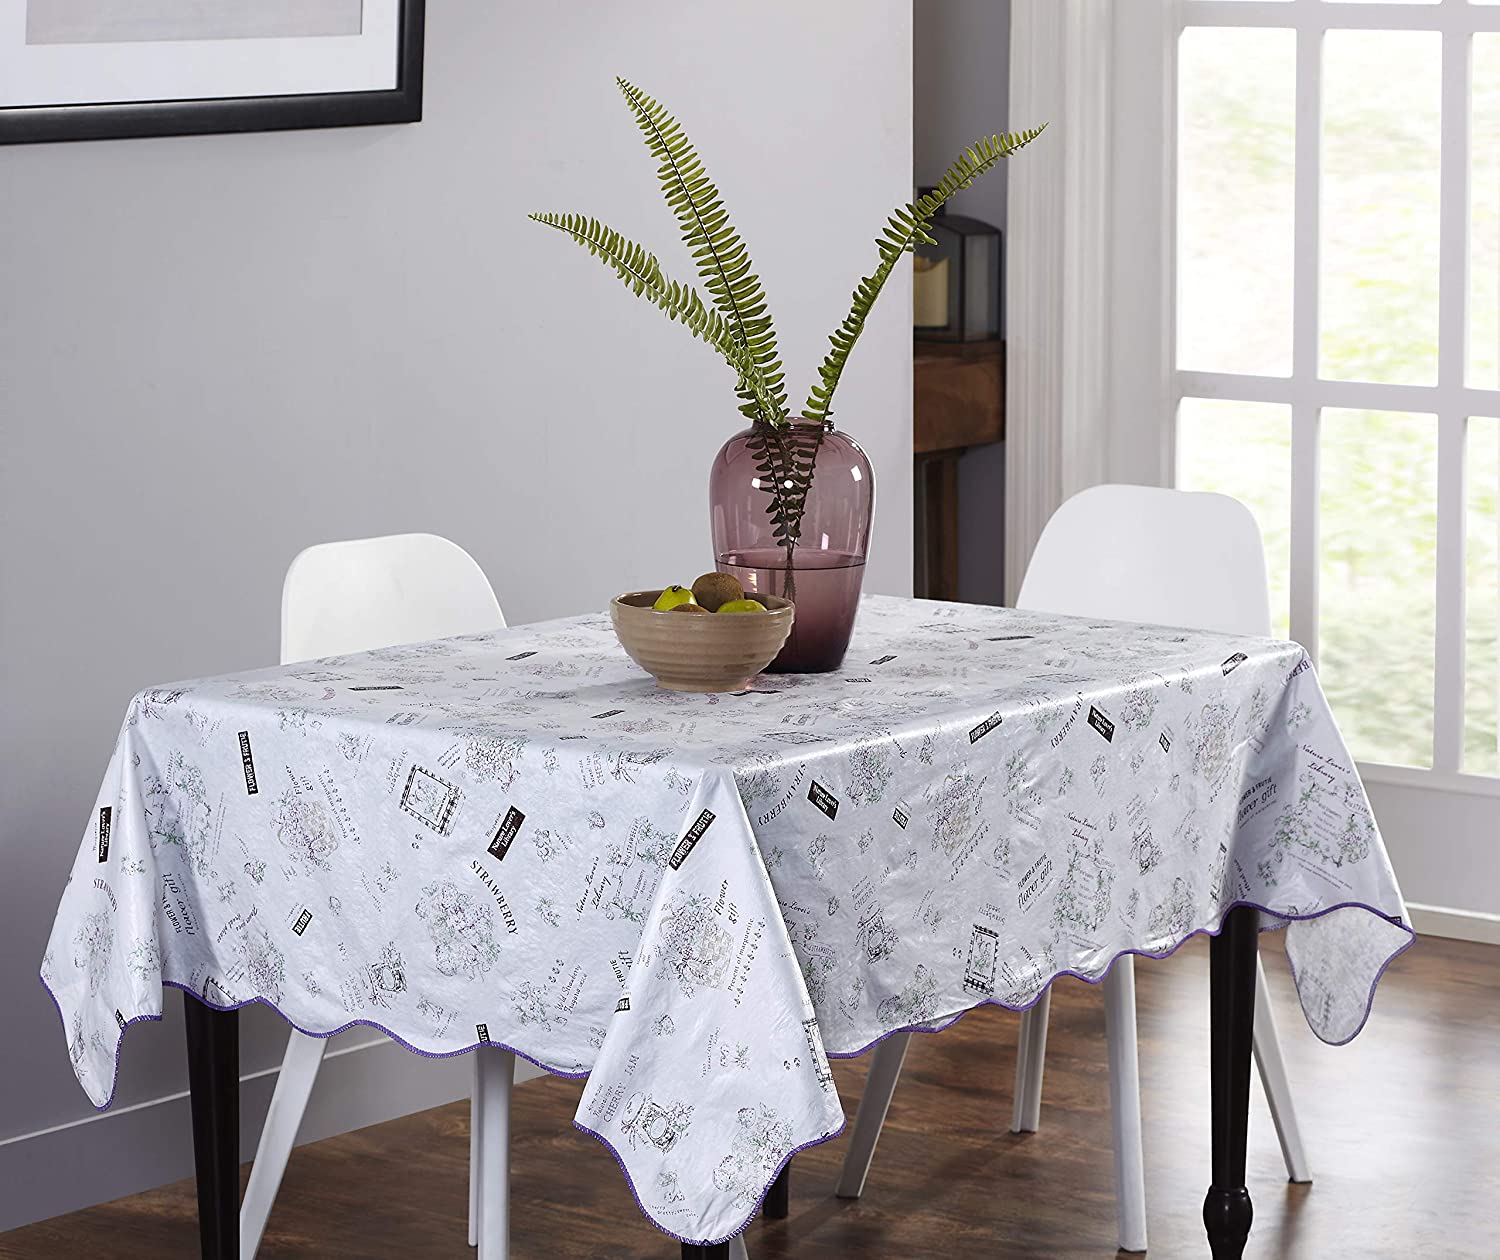 homewards Abstract Floral Design PVC Seater Rectangle Table Cover with Cotton Backing